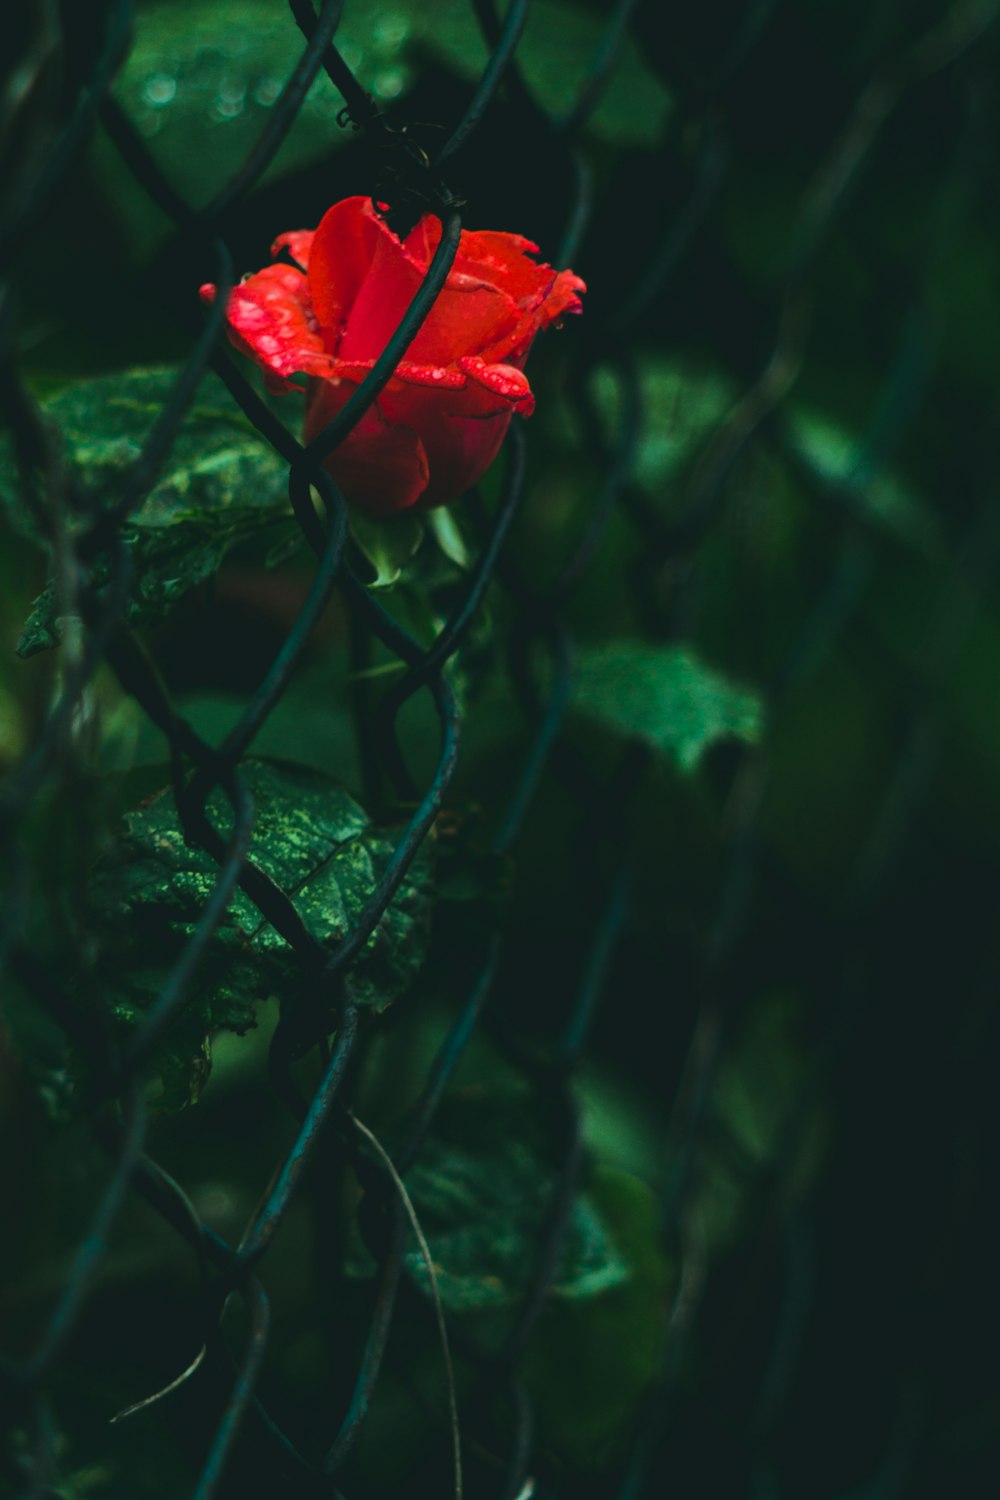 selective focus photography of red rose flower in chain link fence during daytime